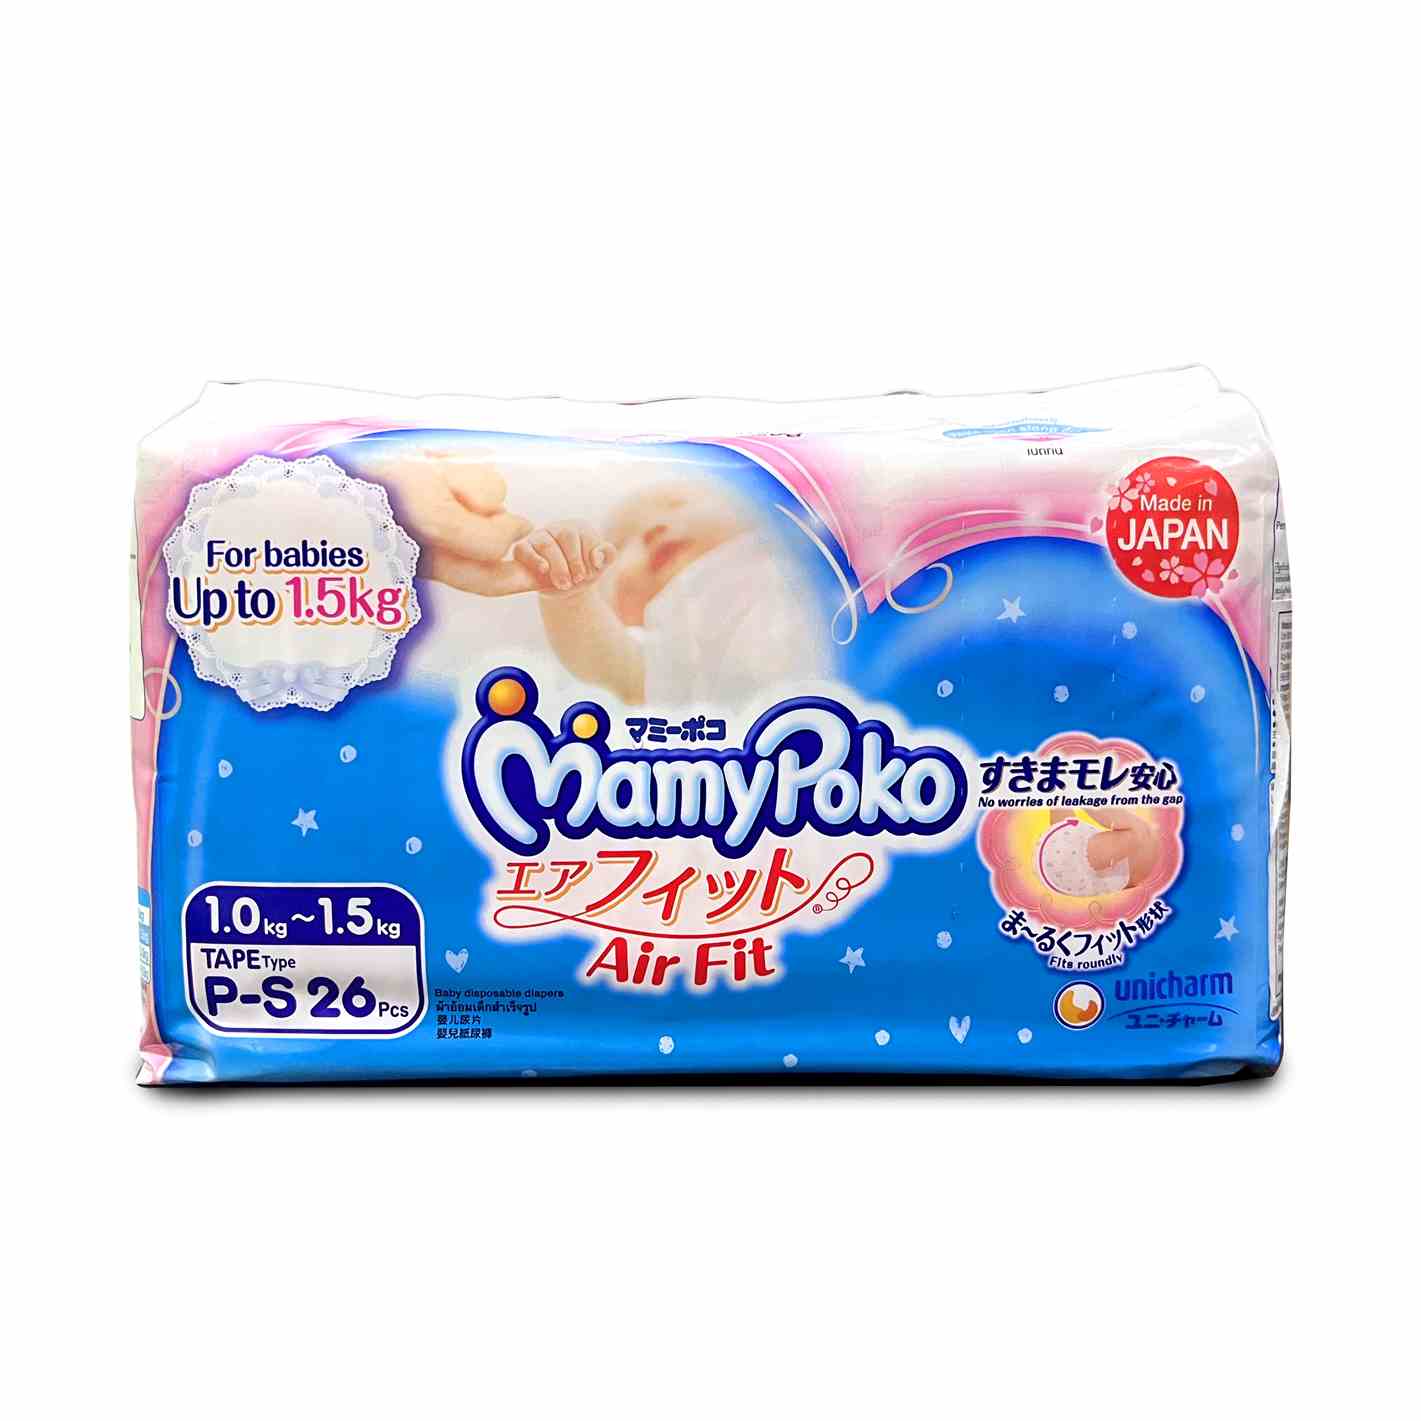 Buy MamyPoko Tape Diapers for Premature Babies up to 1.5kg, P-S 26pcs Online in India at uyyaala.com